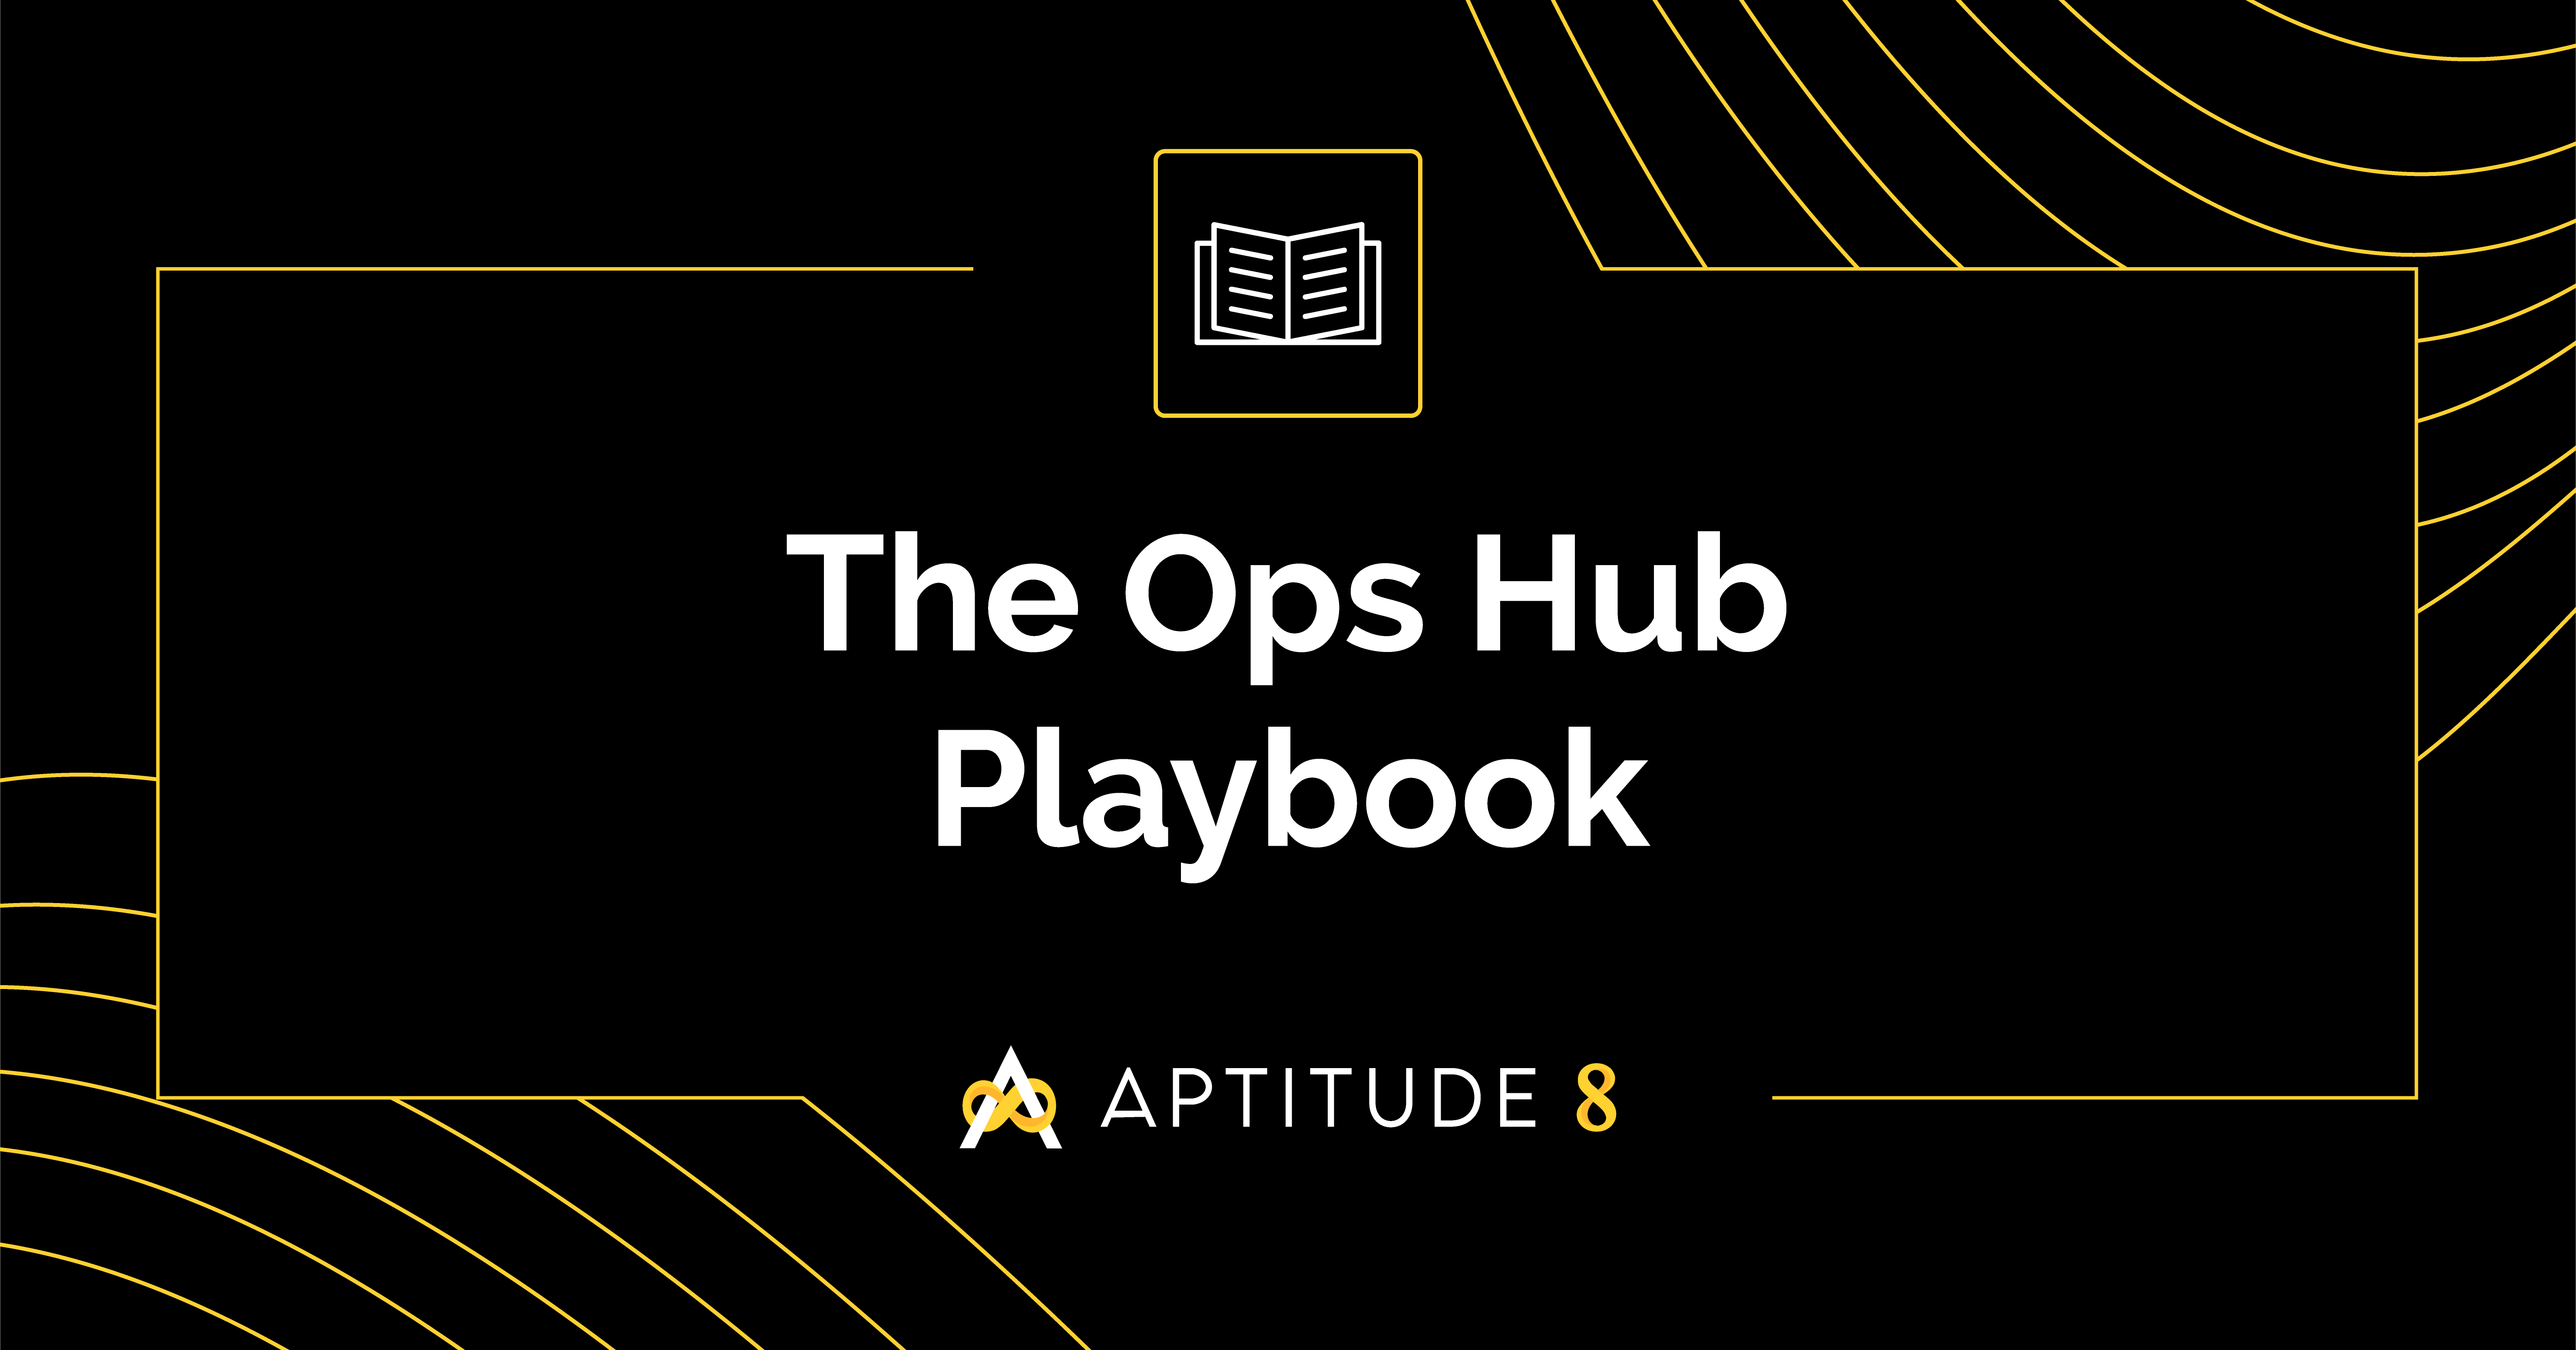 The Operations Hub Playbook